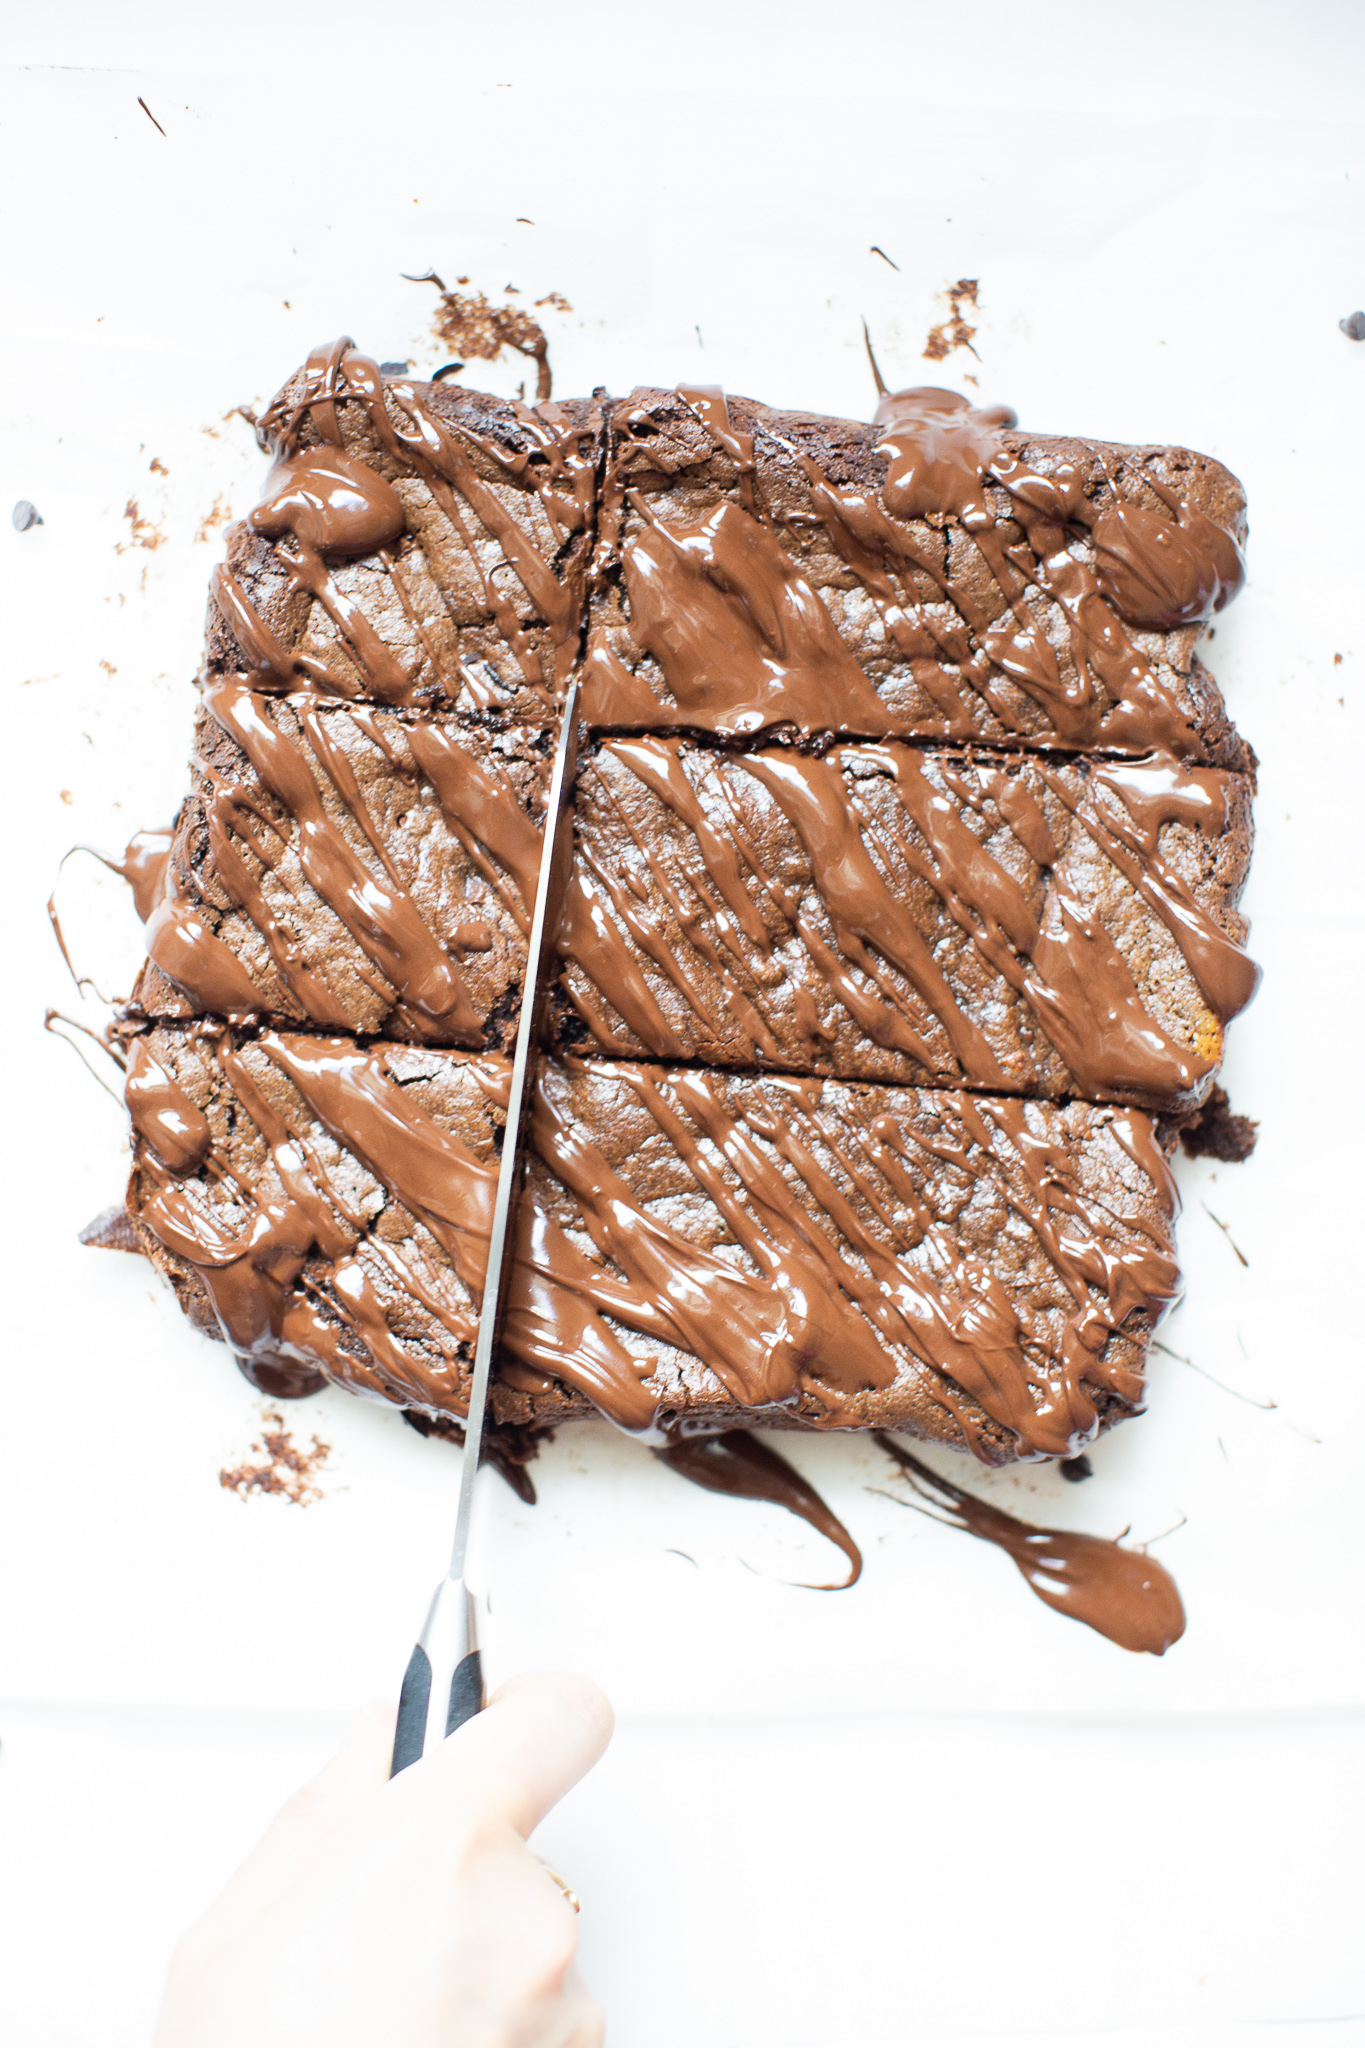 If you've been searching for a guilt-free dessert to satisfy your sweet tooth, then look no further than these magical fudgy tahini brownies. They are easily one of my favorite brownie recipes EVER! #brownies #healthydessert #tahinibrownies #glutenfree #dairyfree #paleo #grainfree | glitterinc.com | @glitterinc